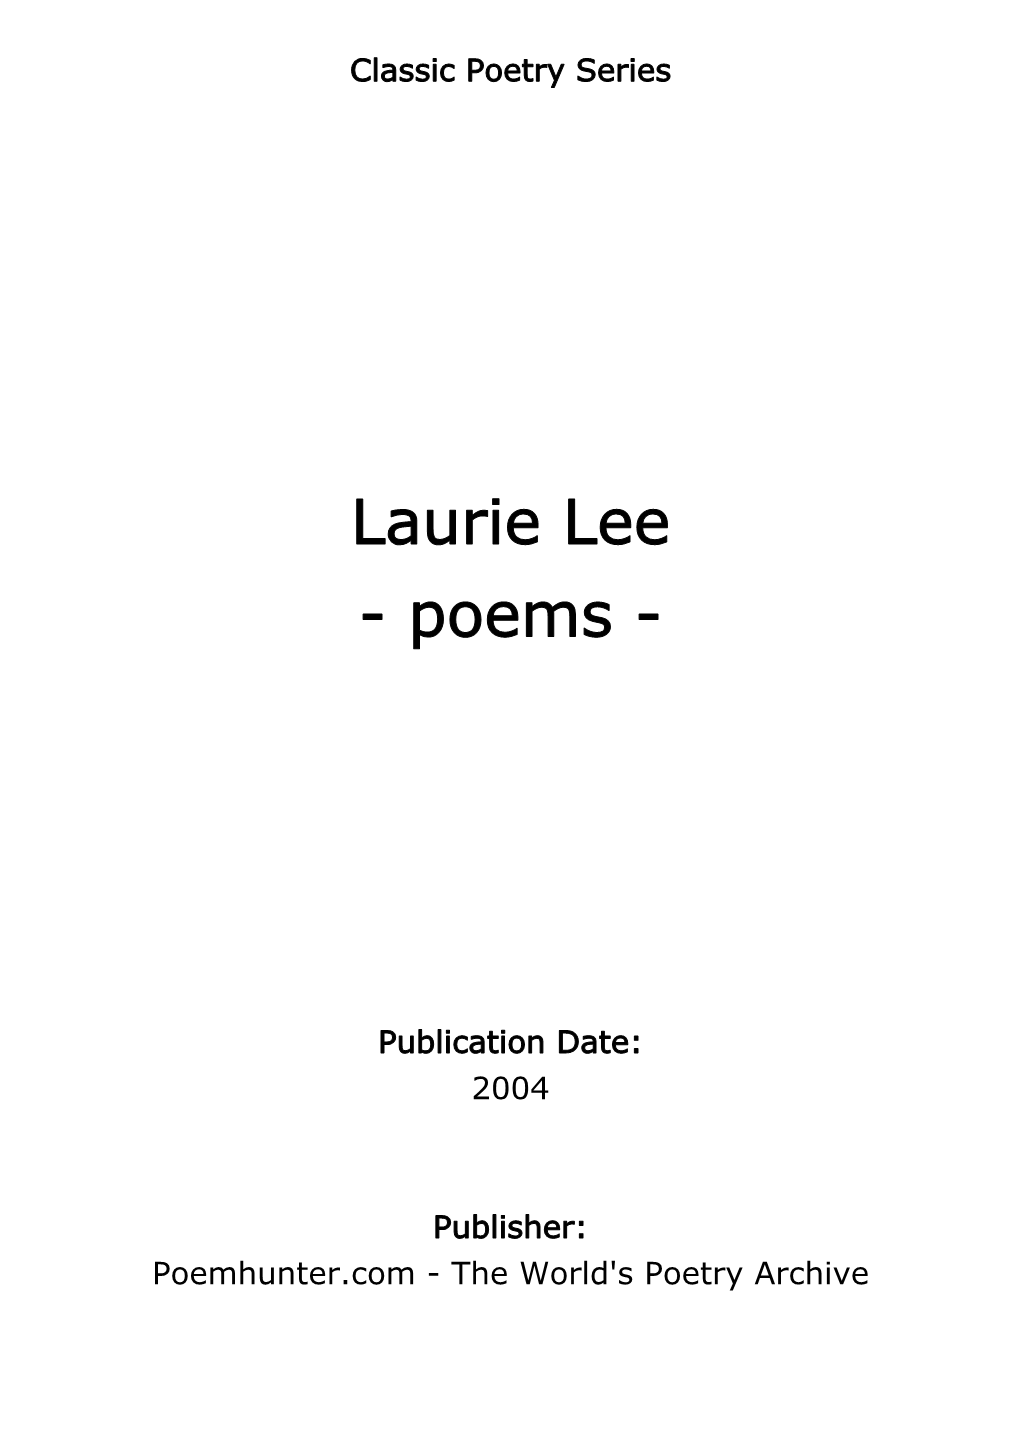 Laurie Lee - Poems